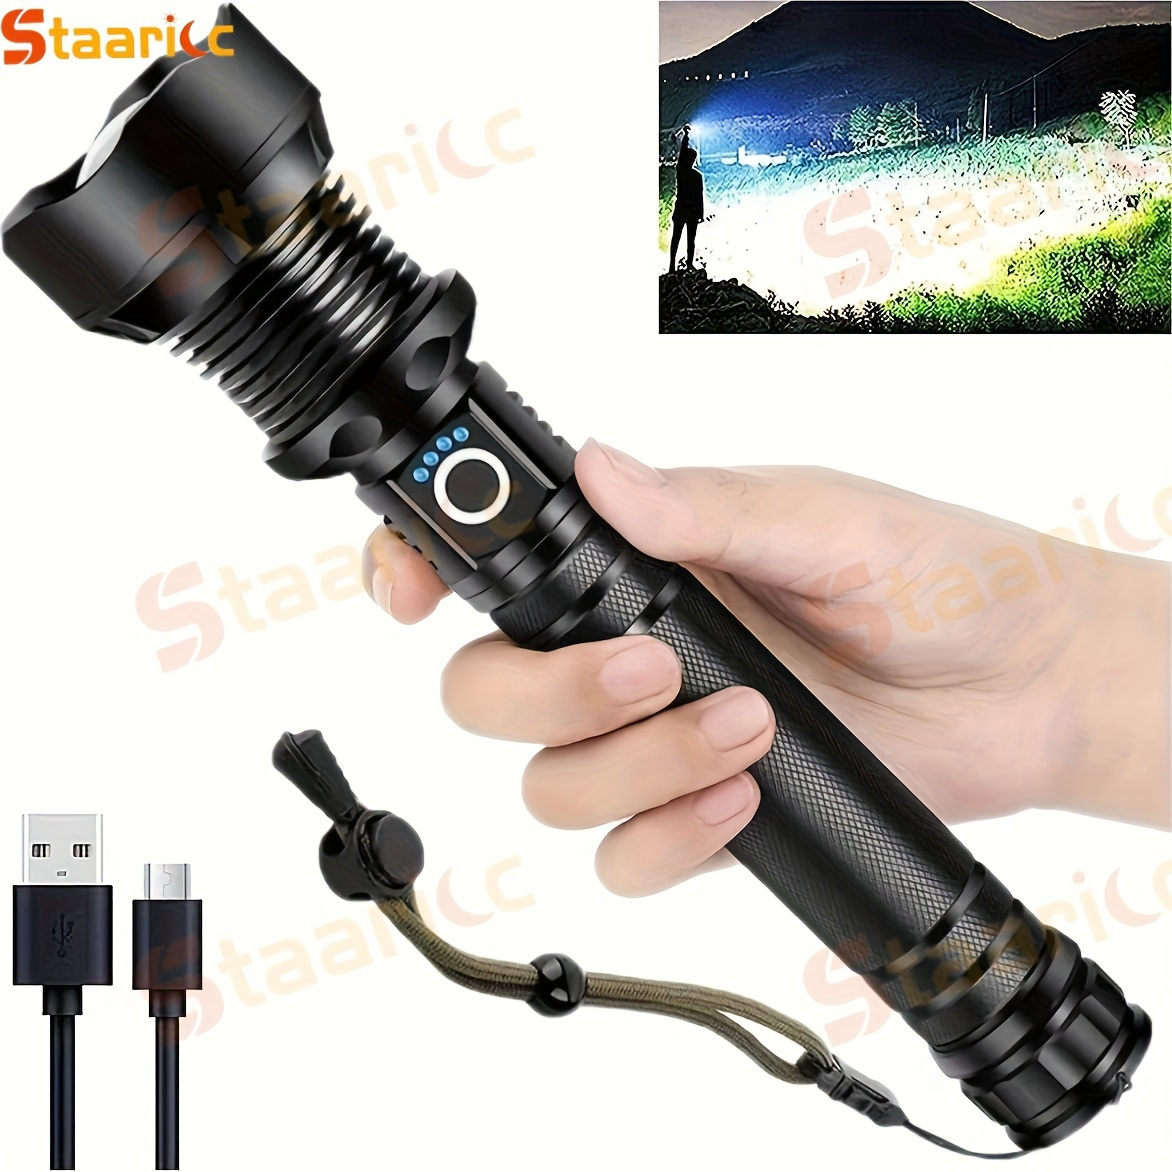 

Staaricc 1pc Rechargeable High Lumen Led Flashlights, Xhp70 Super Bright Flashlights Zoomable, With Usb Cable 5 Modes, For Outdoor Patrol Camping Fishing Hunting Emergencies